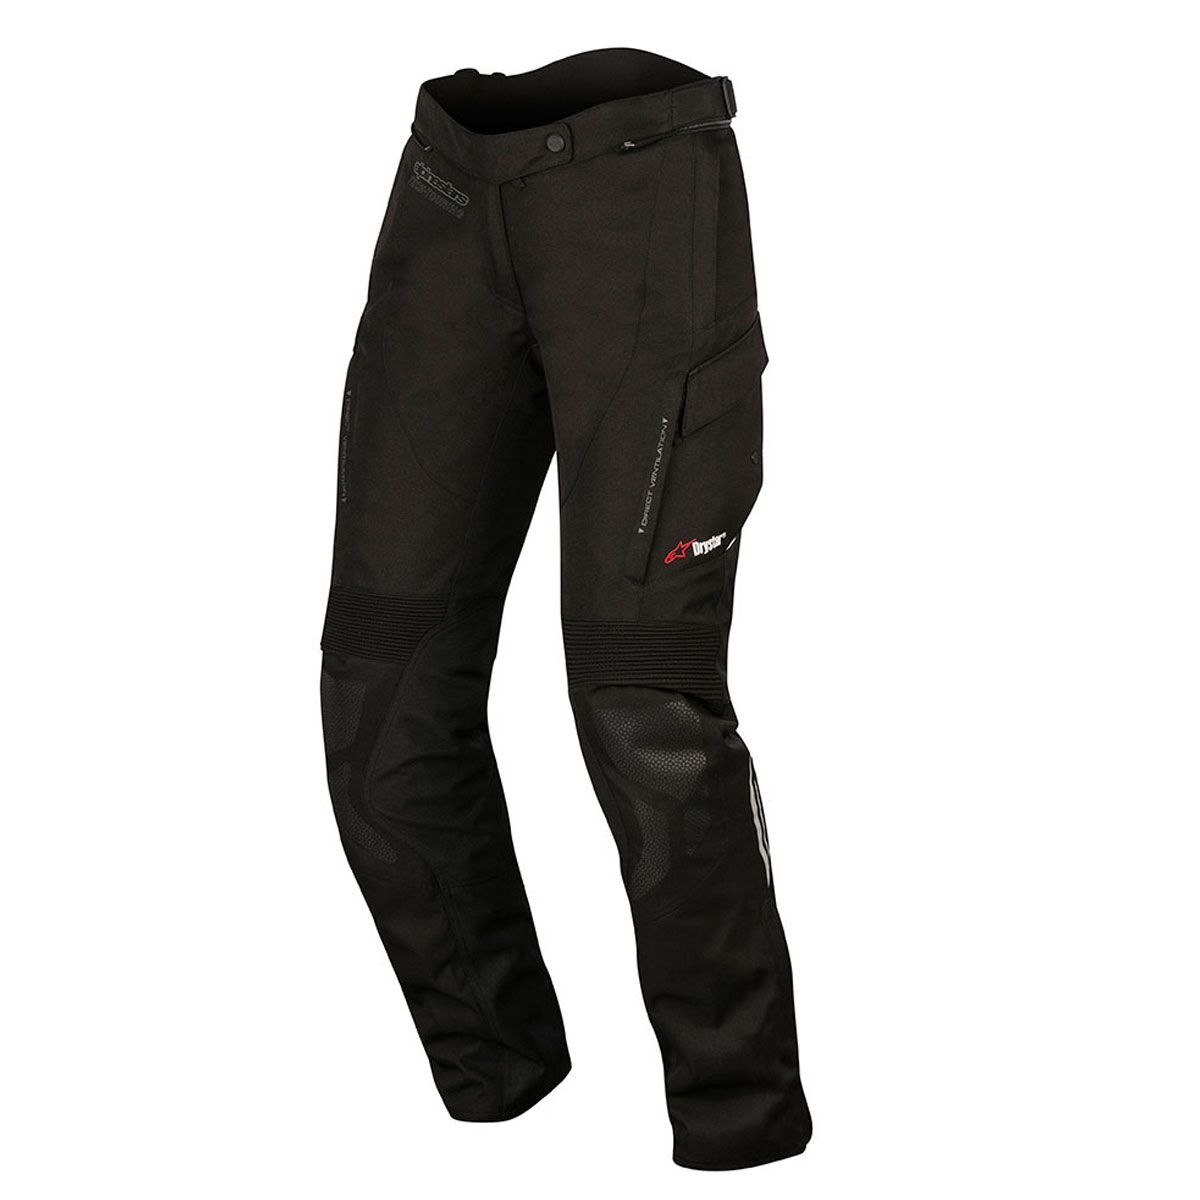 Capobranco Shop - Product: 3636517 - ALPINESTARS STELLA PATRON WOMEN'S  MOTORCYCLE TROUSERS - Alpinestars (Clothing and accessories - Women's  trousers);